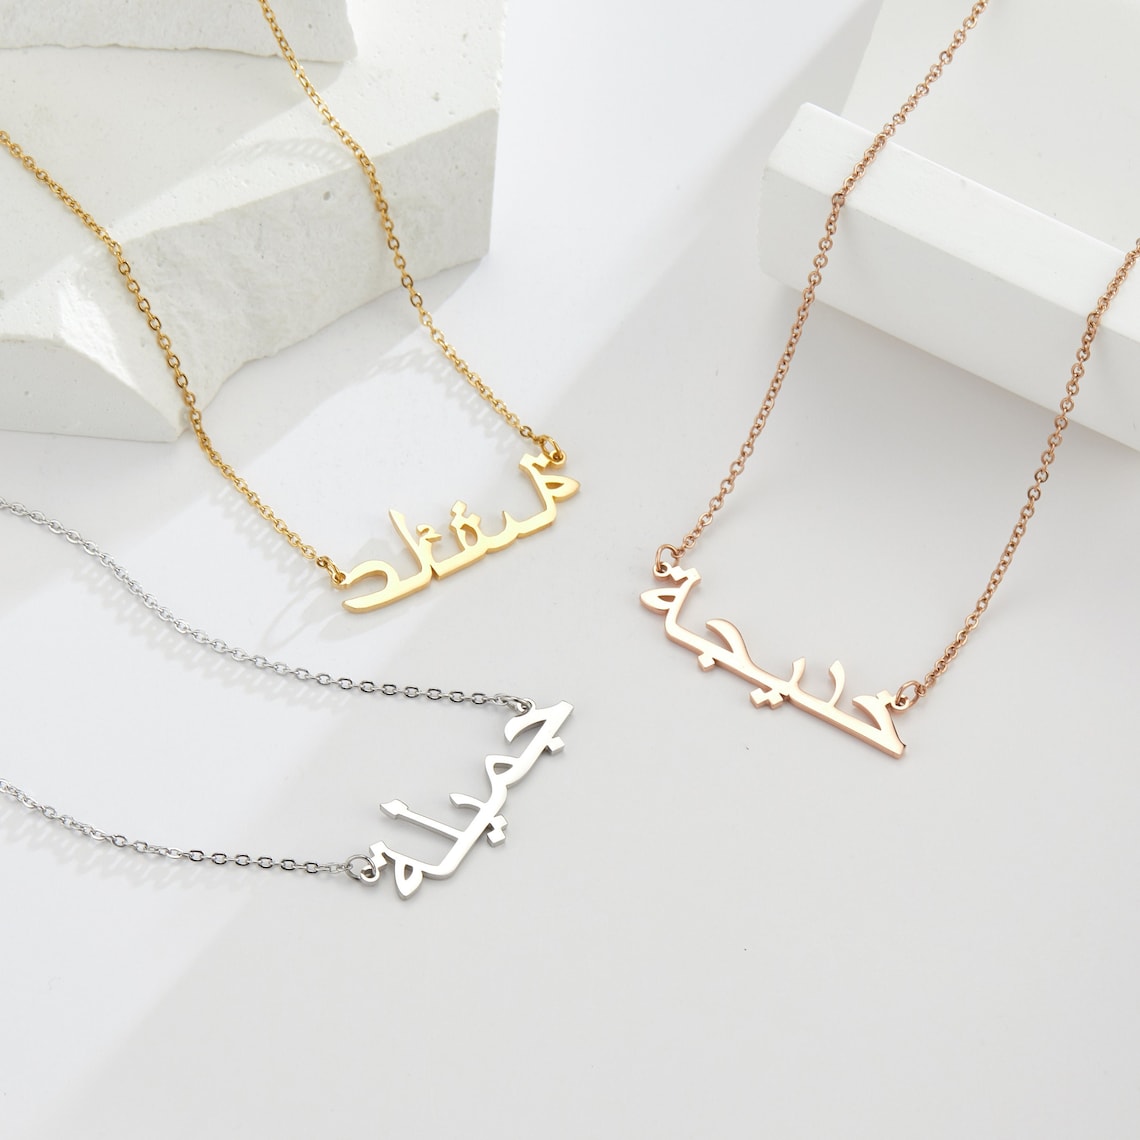 Buy Personalised Handmade Gold Plated Name Necklace in Arabic Calligraphy  With ANY NAME of Your Choice Online in India - Etsy